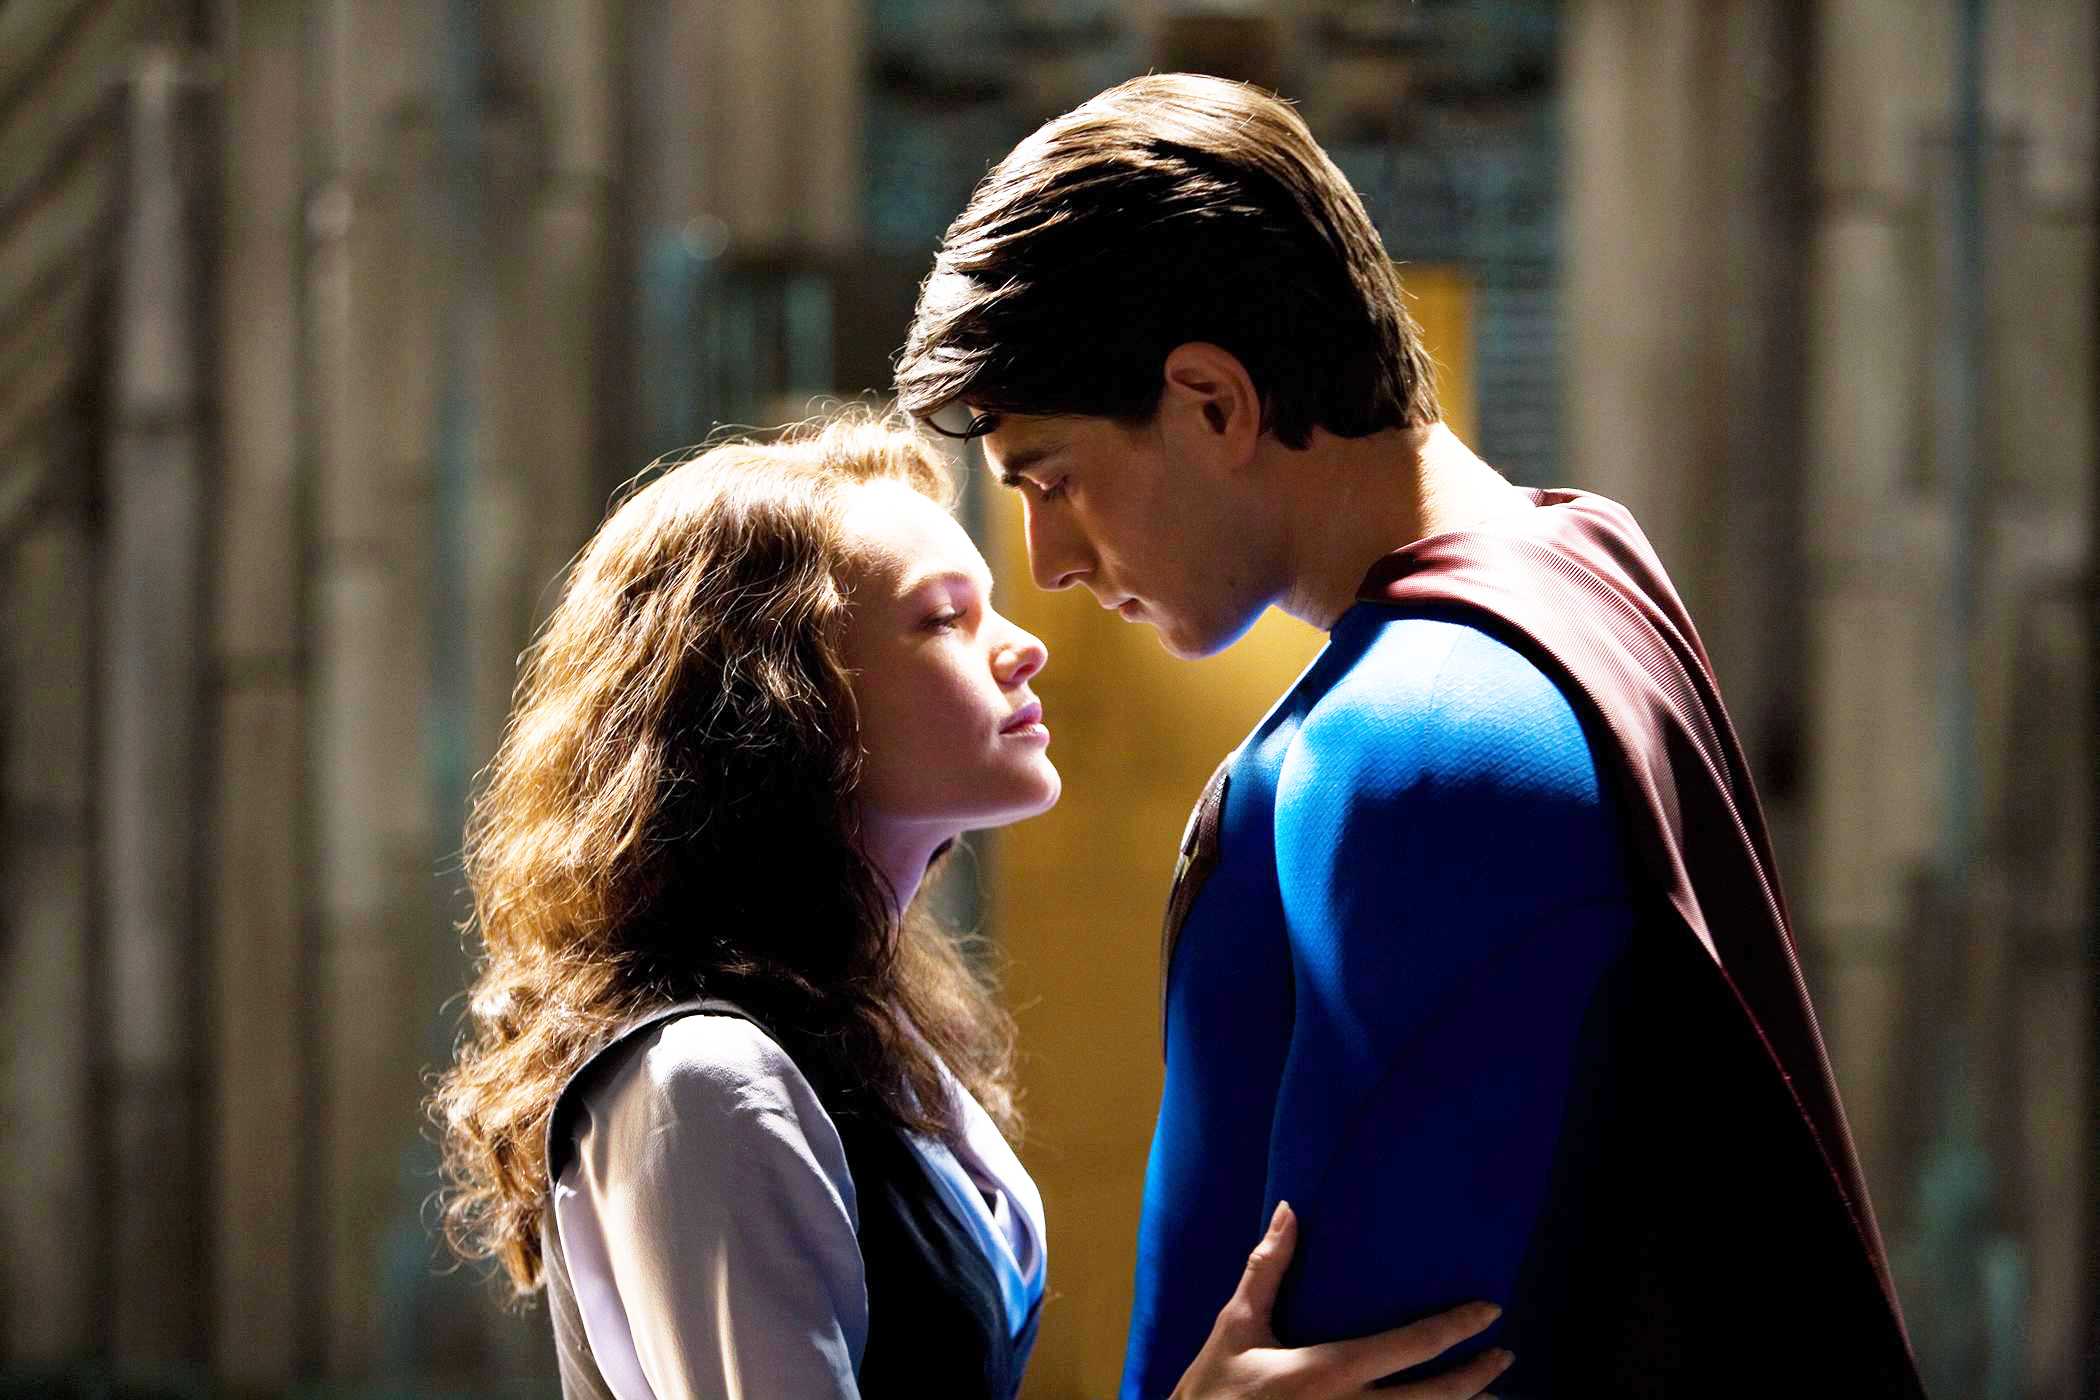 Kate Bosworth and Brandon Routh in Warner Bros Pictures' Superman Returns (2006)